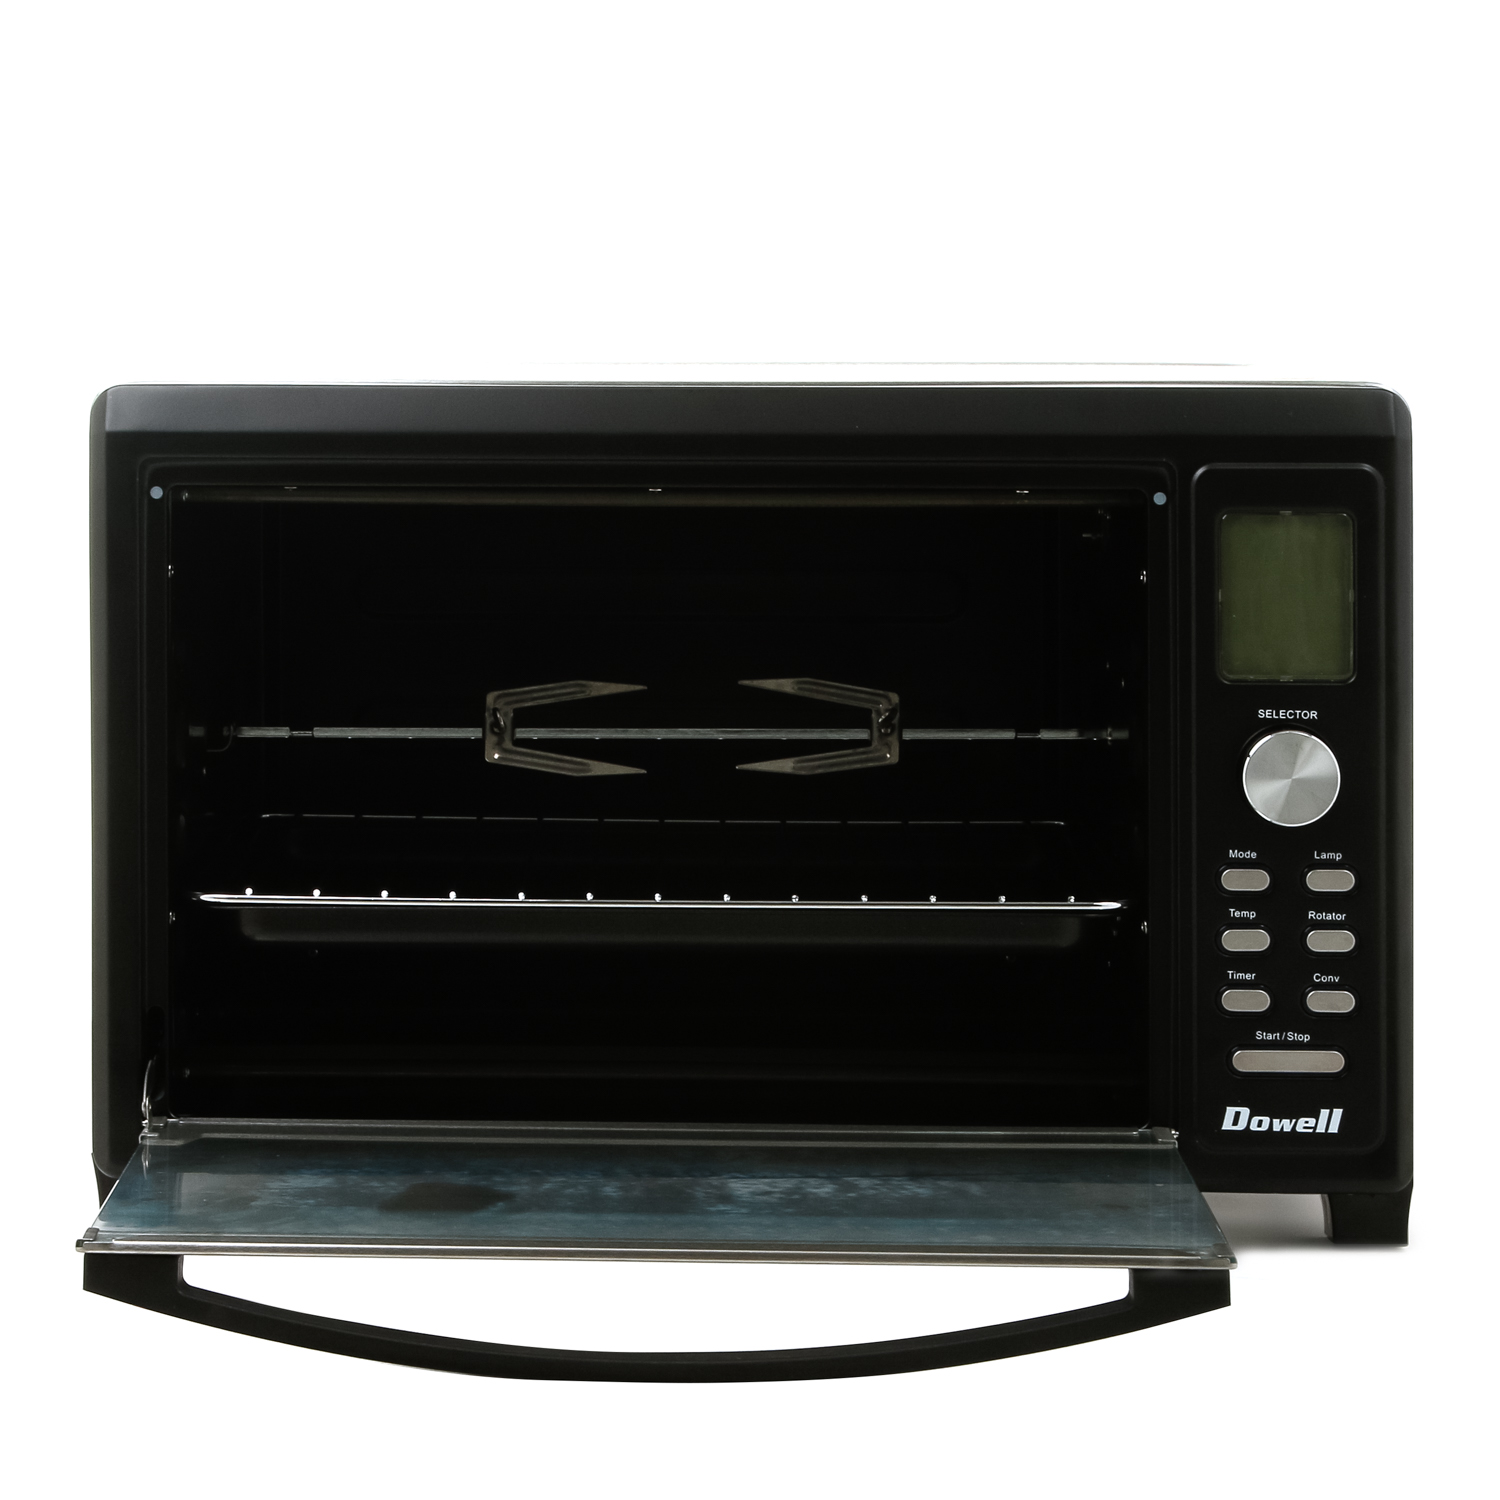 Best Electric Oven For Baking Of 2020 Buyer Guide And Reviews